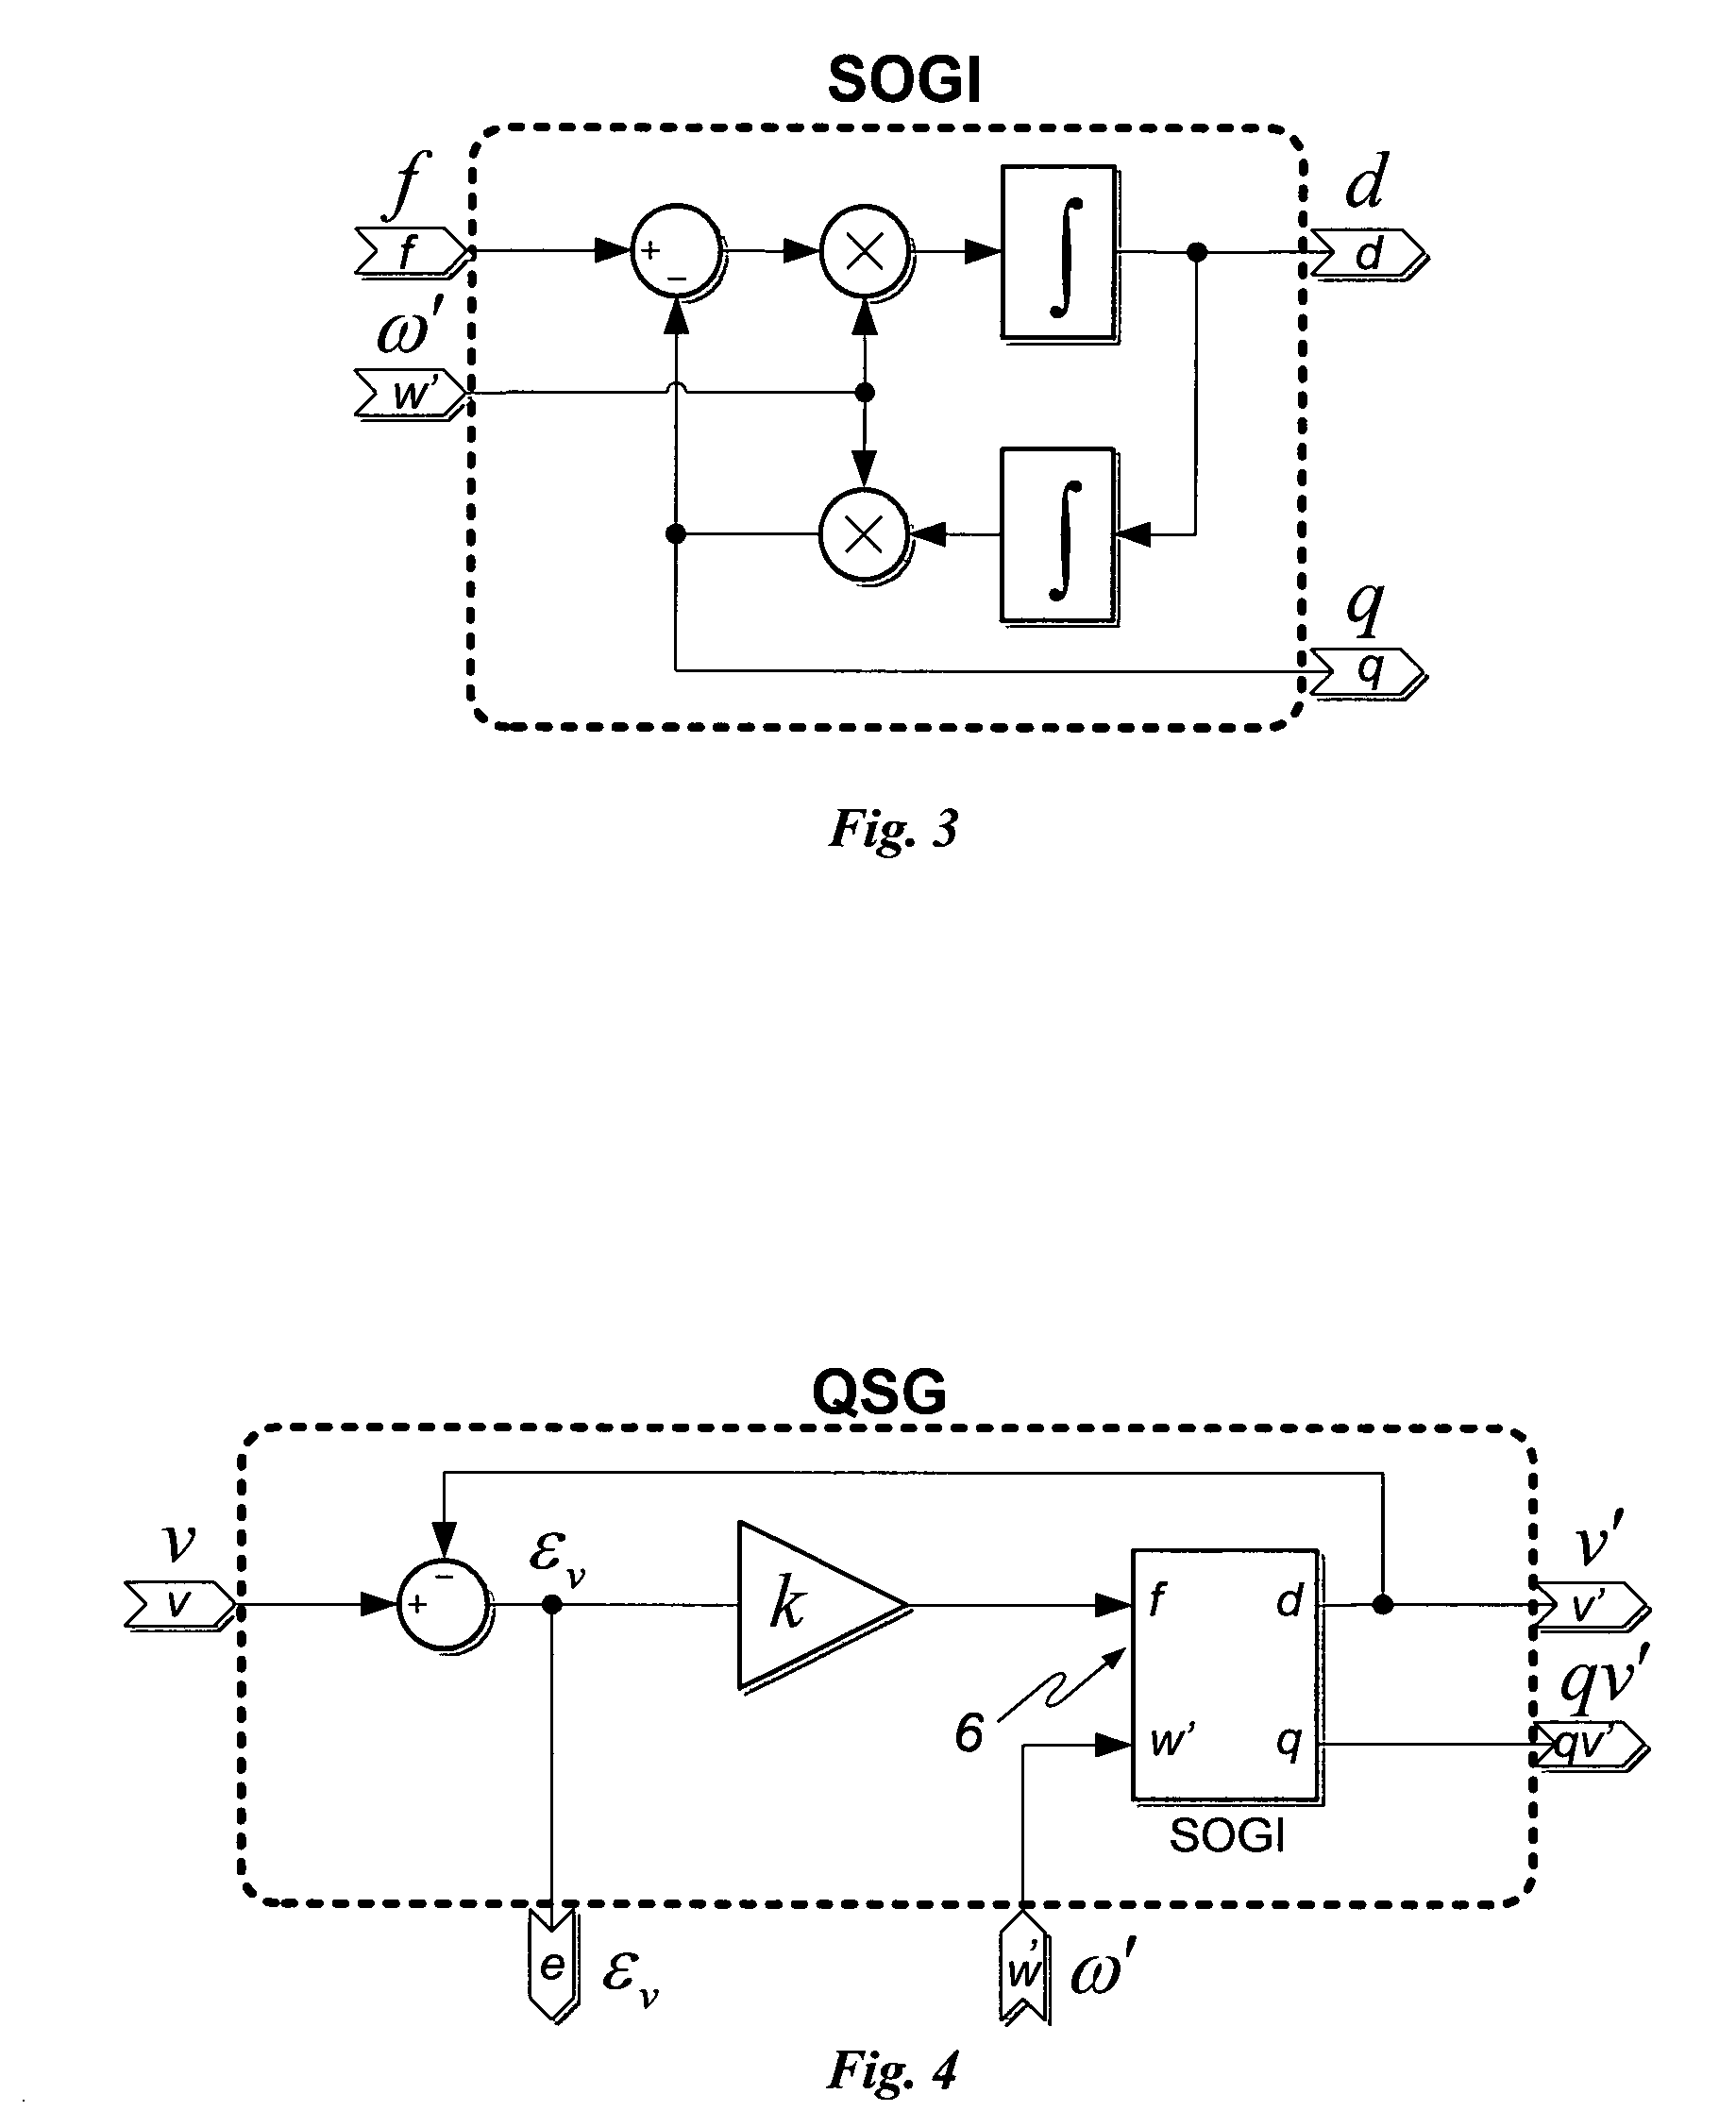 Advanced real-time grid monitoring system and method